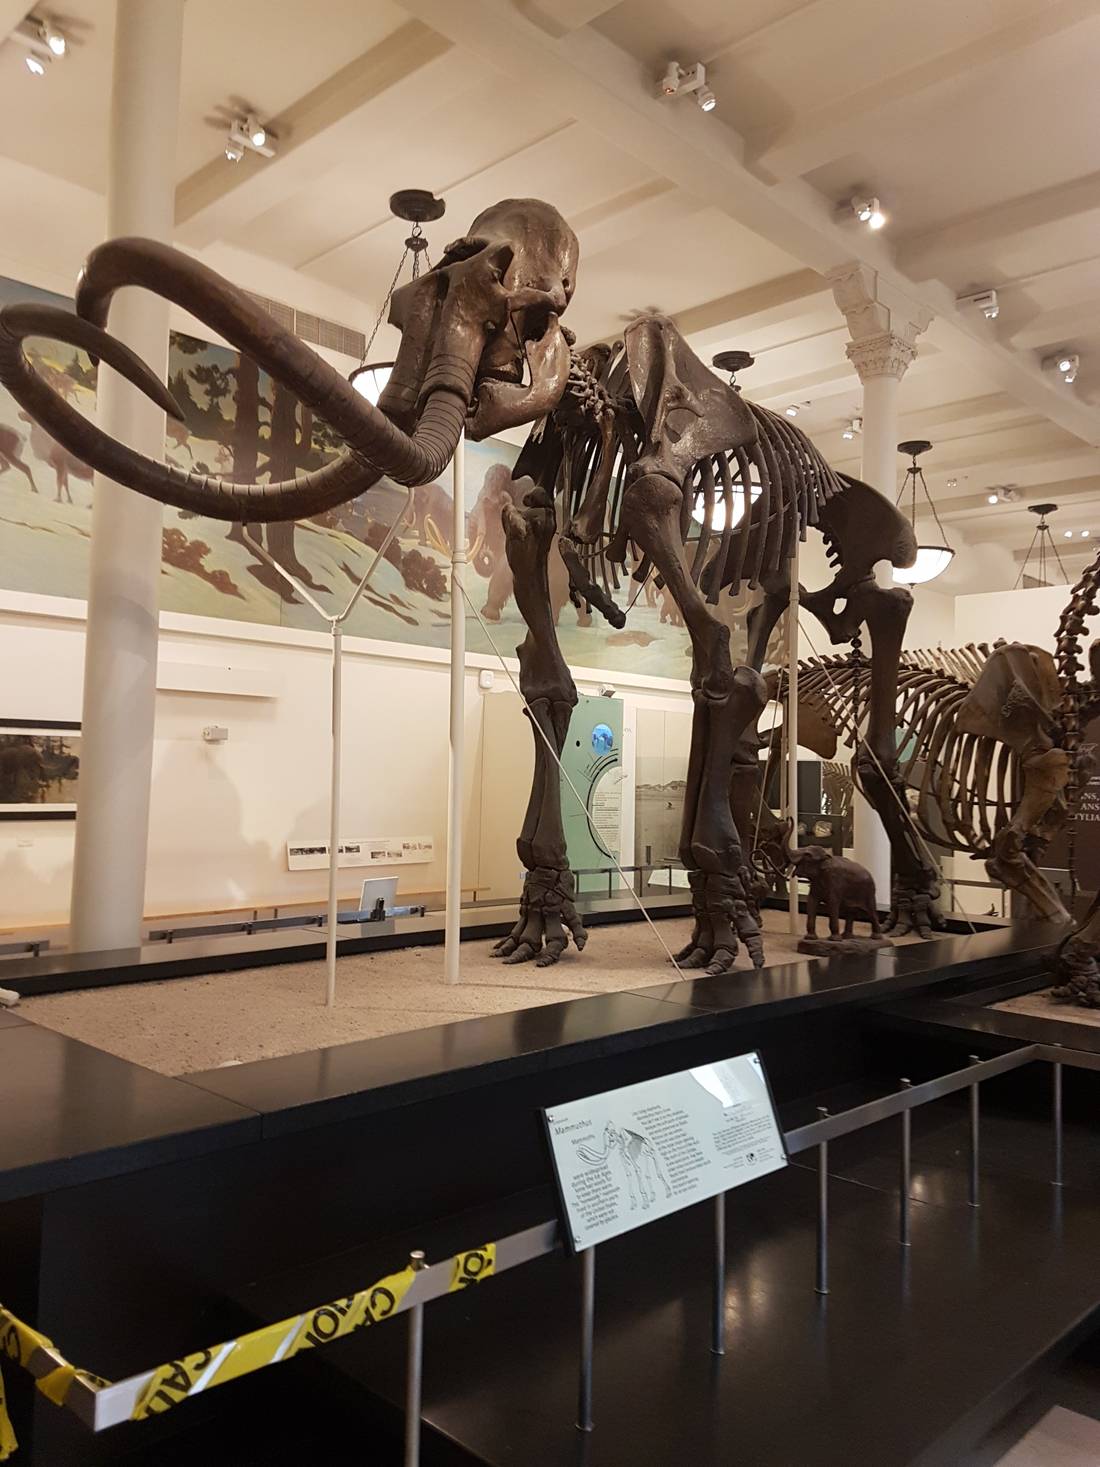 11,000 year old Mammoth in the American Museum of Natural History. It’s one thing to watch a documentary on TV about mammoths. It’s another to see a life-sized skeleton up close!